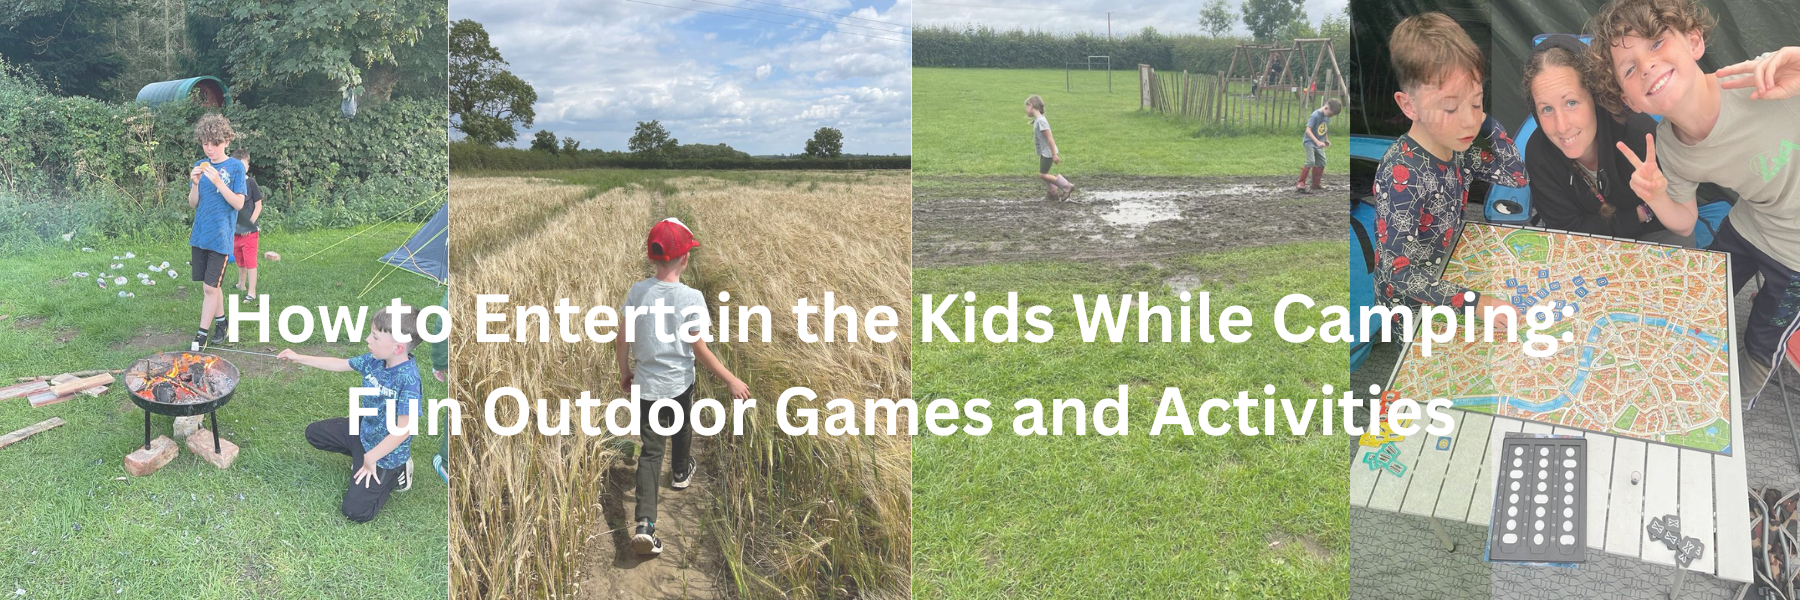 How to Entertain the Kids While Camping Fun Outdoor Games and Activities